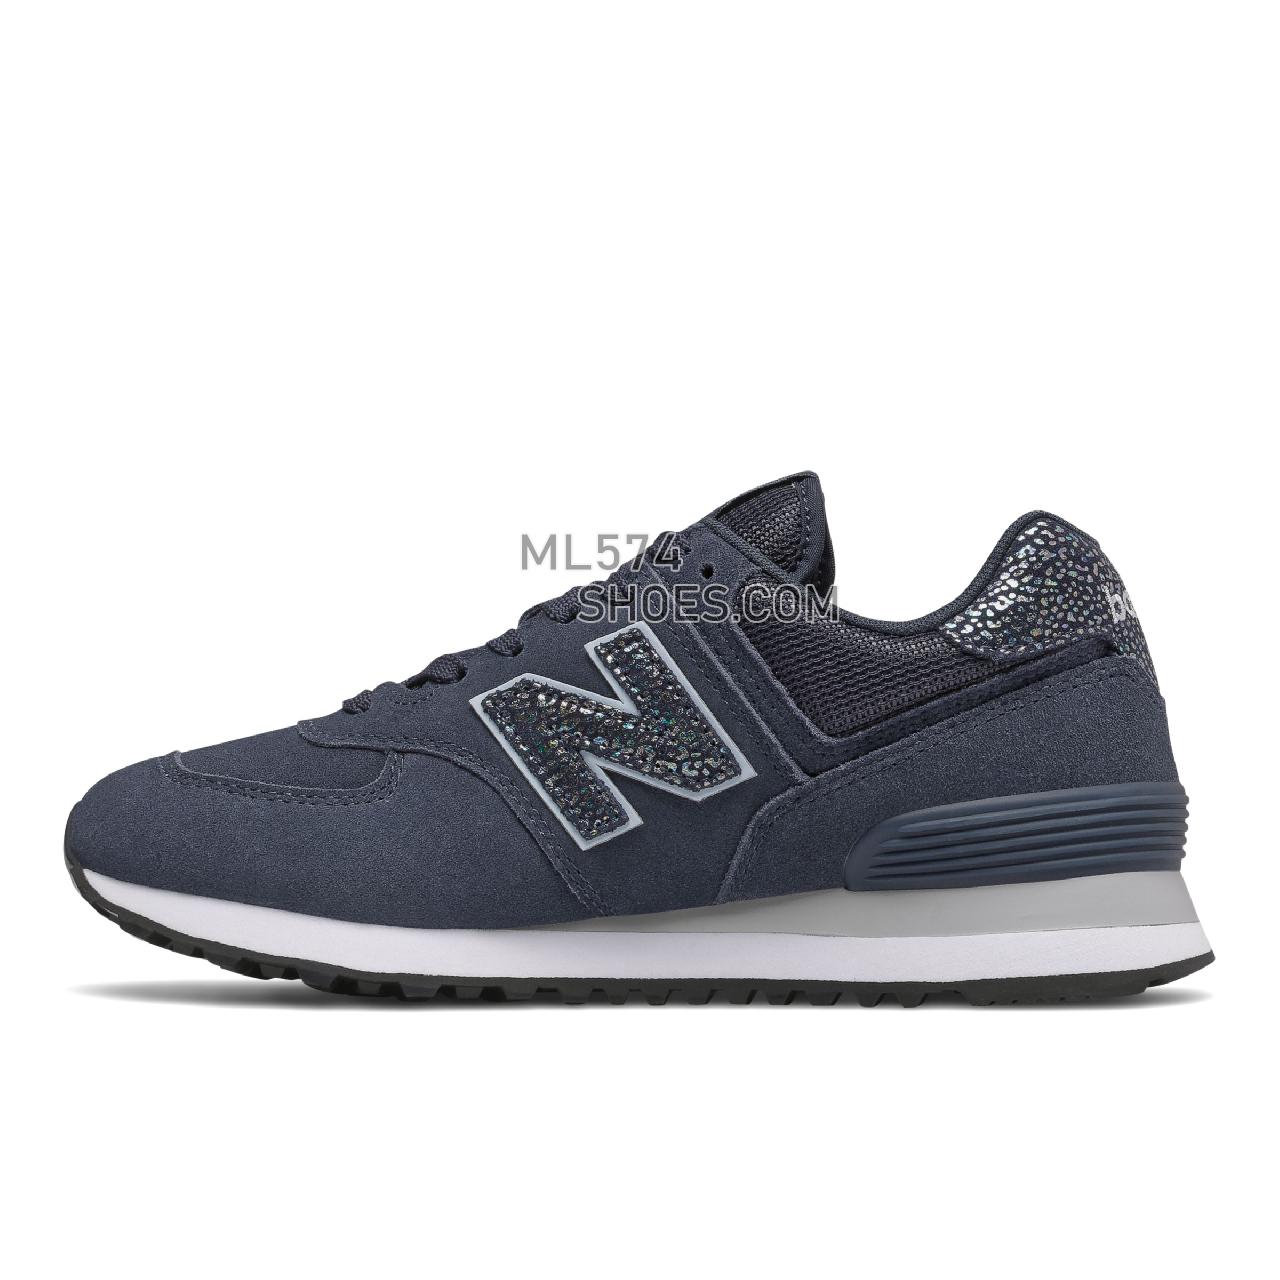 New Balance 574 - Women's Classic Sneakers - Nb Navy with White - WL574AM2